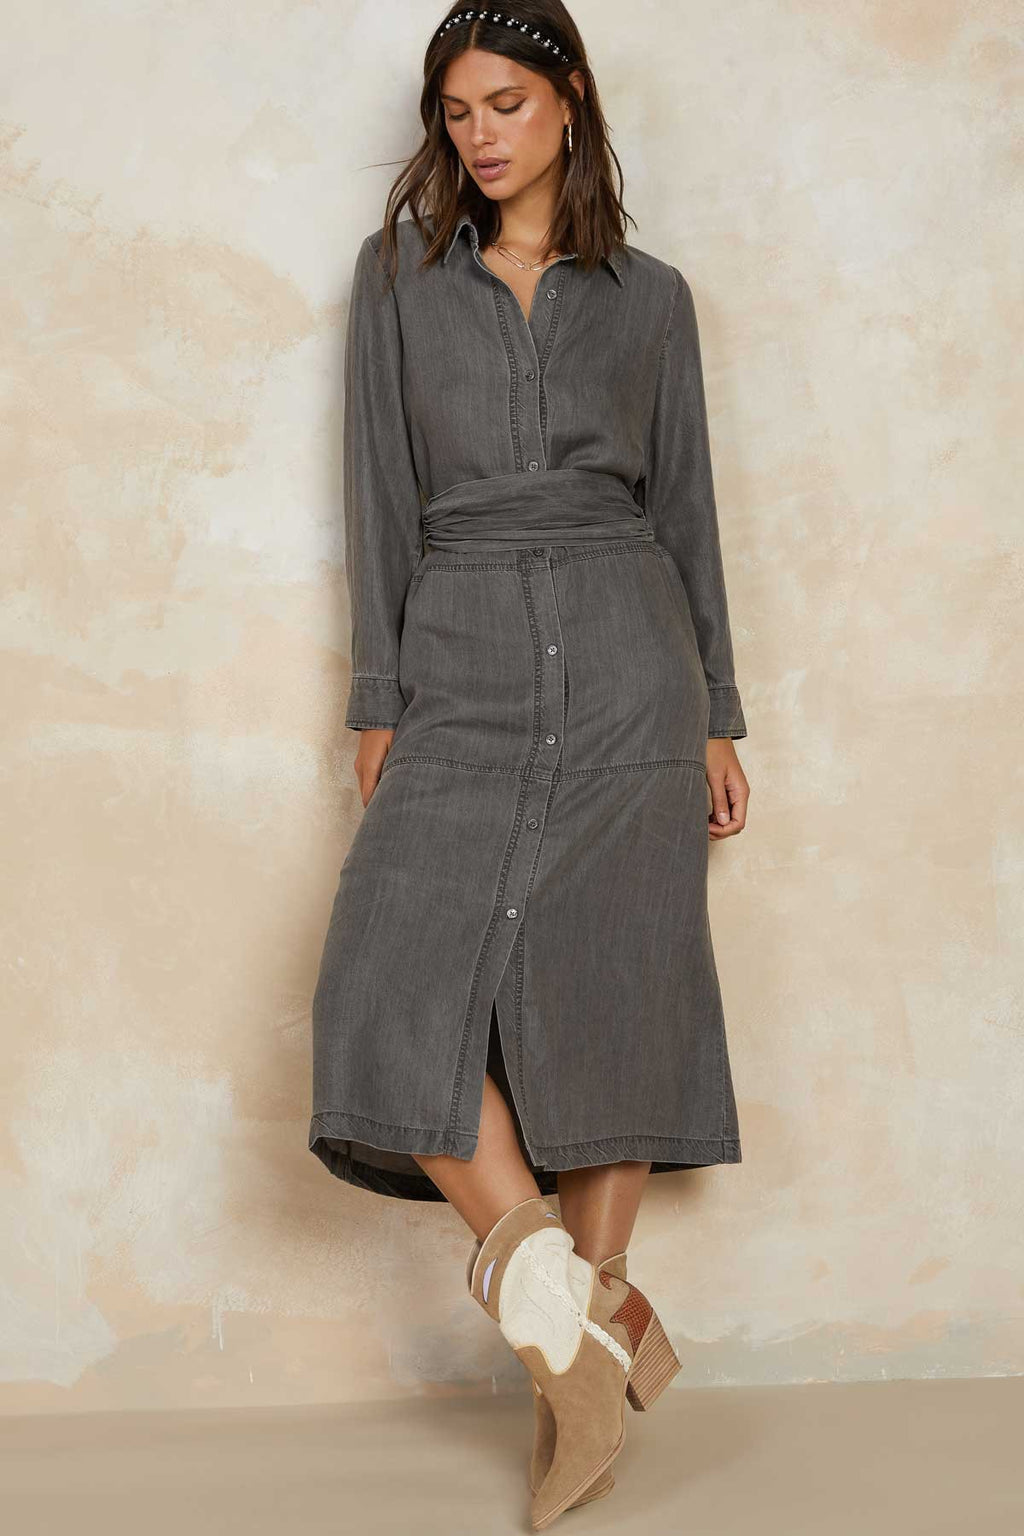 Living on the Edge Black Chambray Dress with Belt FINAL SALE